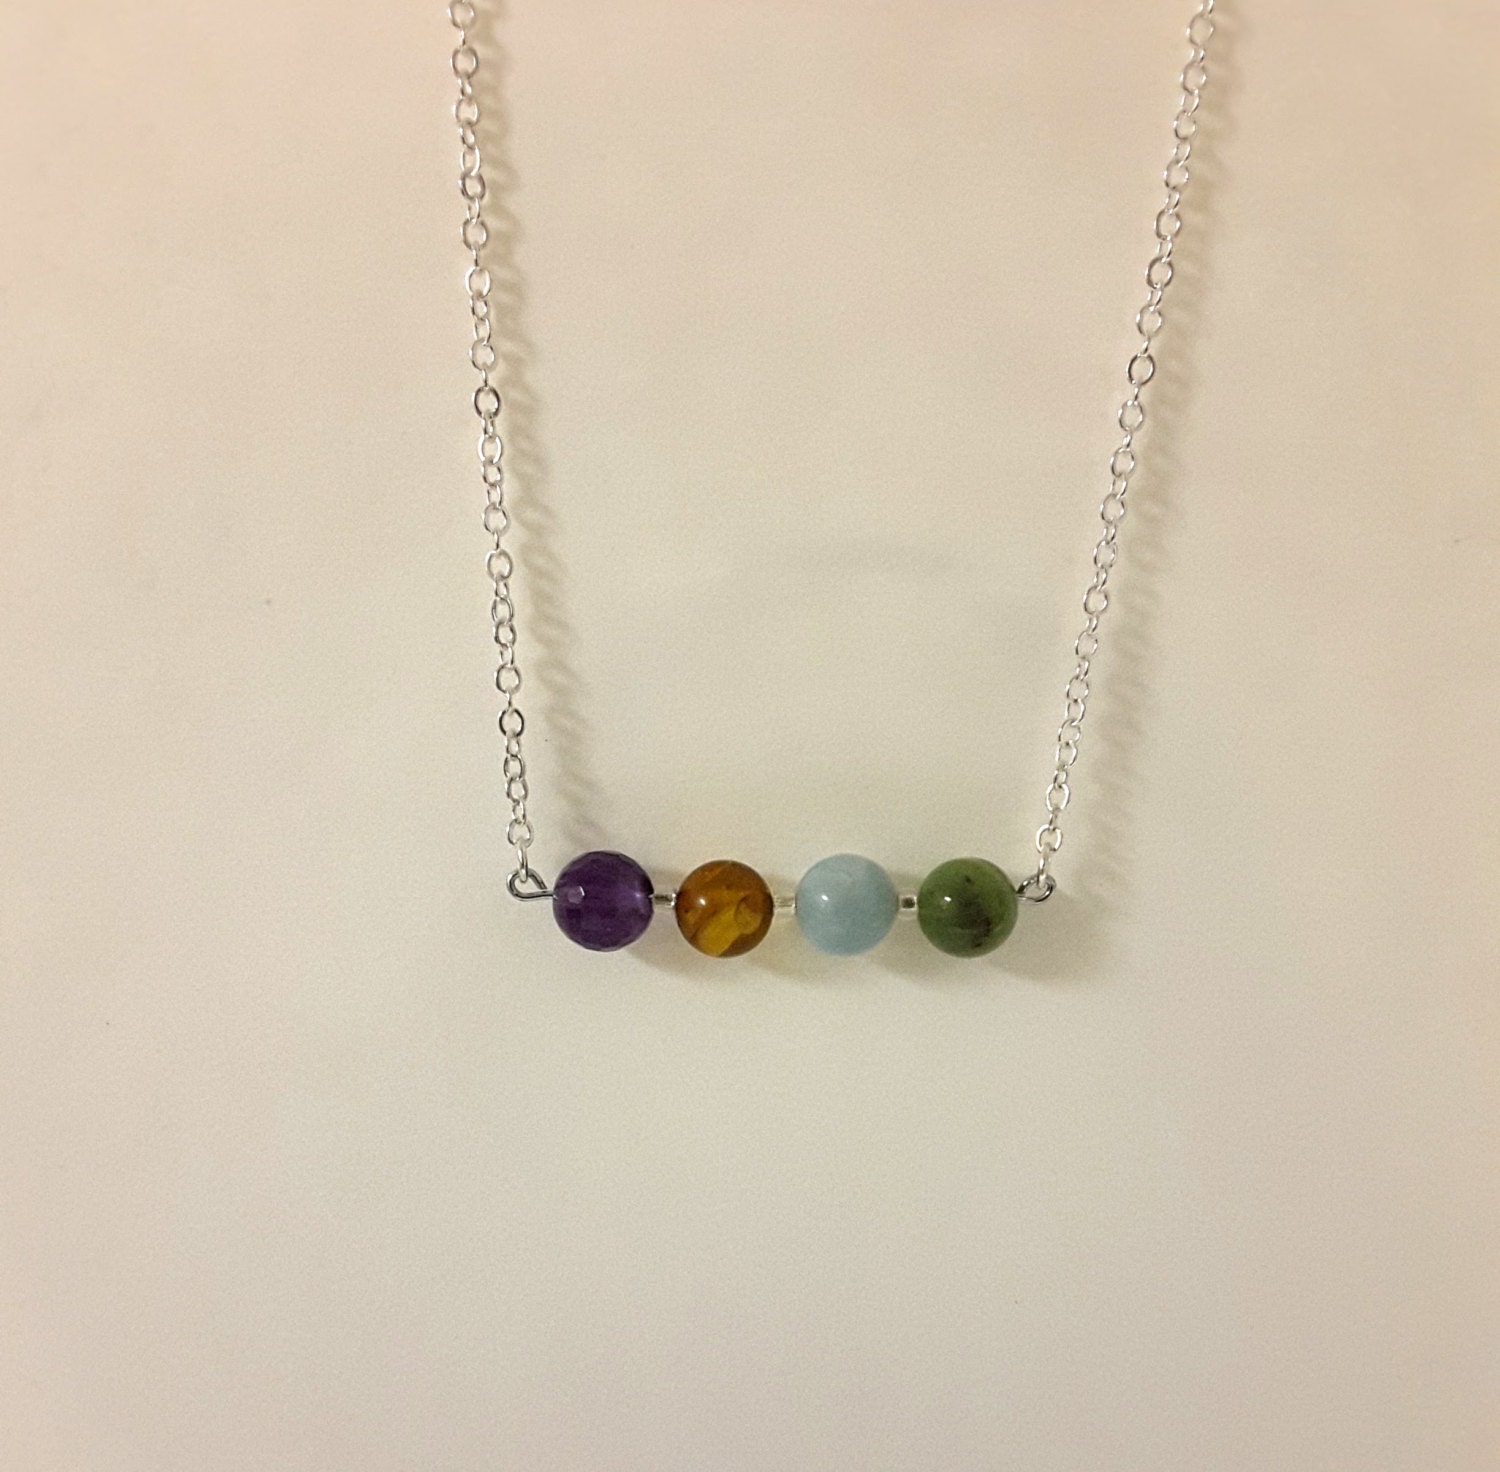 Four Elements Crystal Necklace by FromElizabeth on Etsy